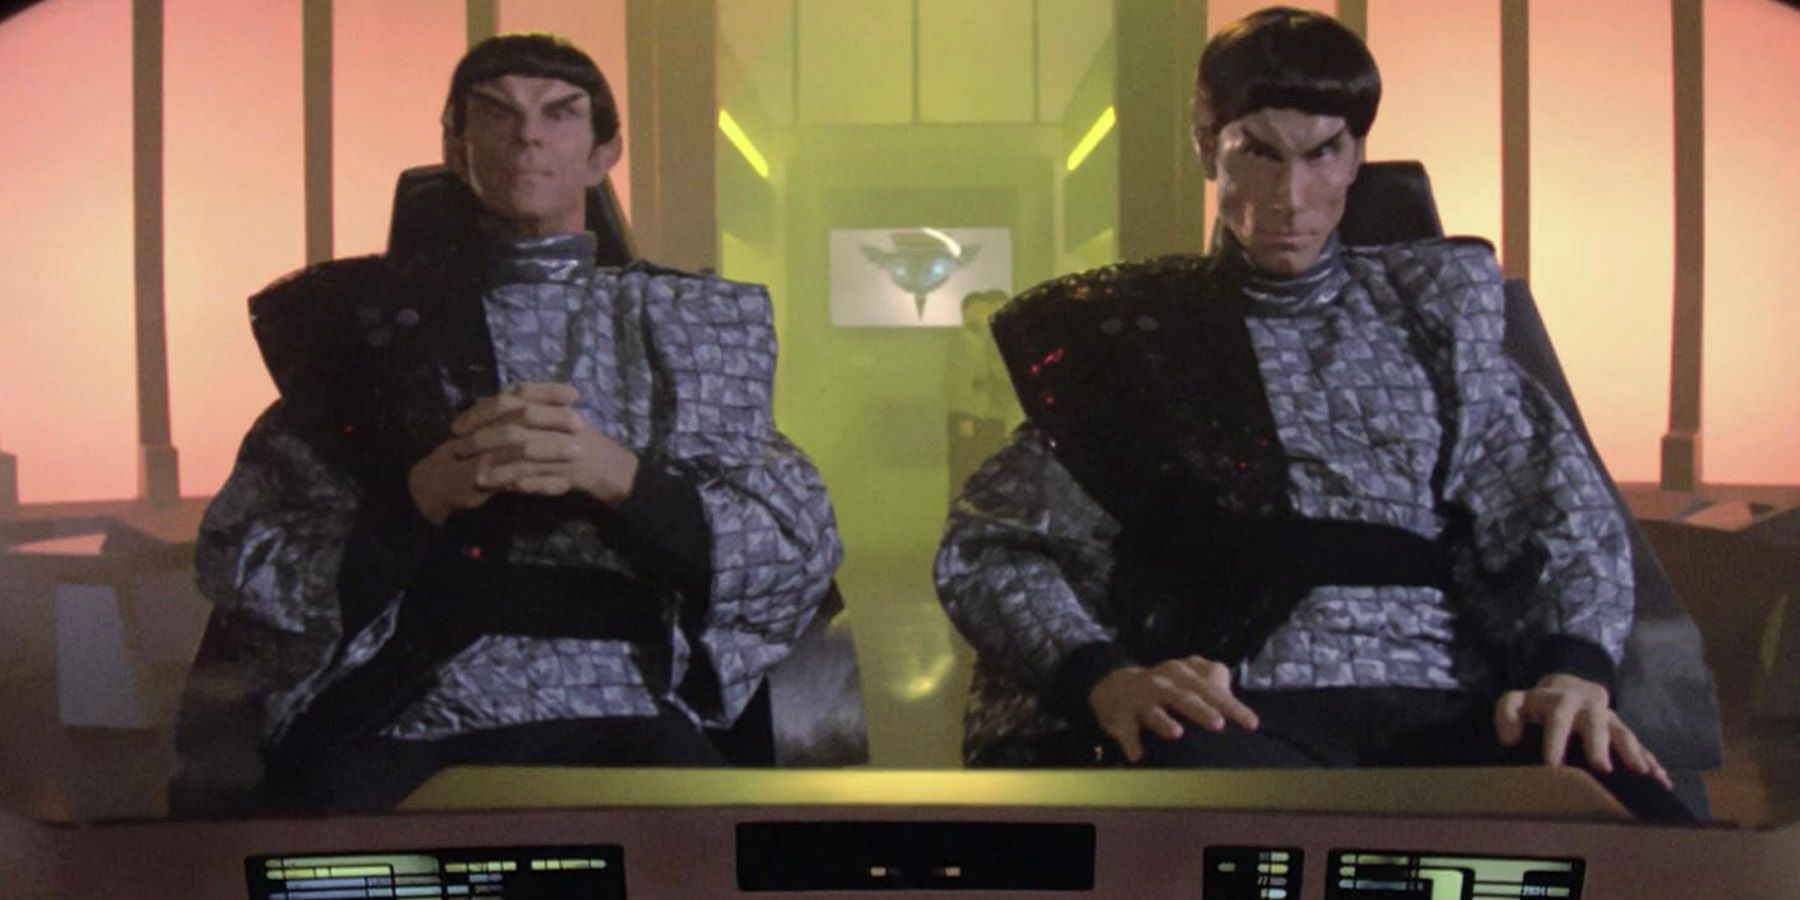 Romulan Commanders Tebok and Thei address the Enterprise in The Neutral Zone